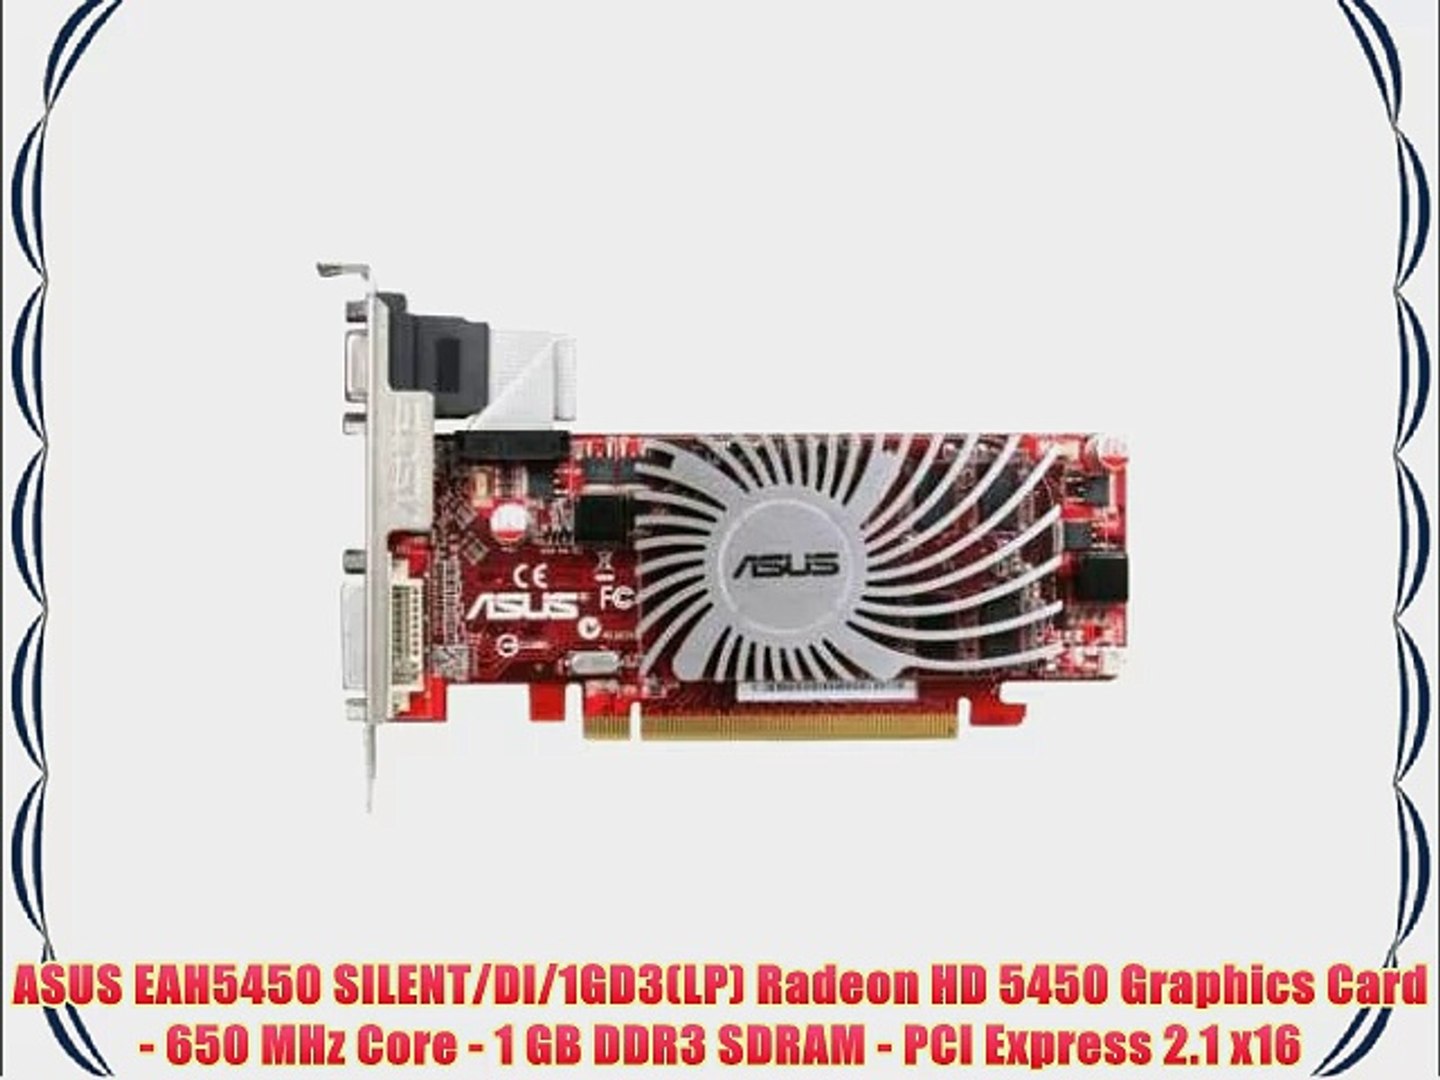 ASUS EAH5450 SILENT/DI/1GD3(LP) Radeon HD 5450 Graphics Card - 650 MHz Core  - 1 GB DDR3 SDRAM - video Dailymotion